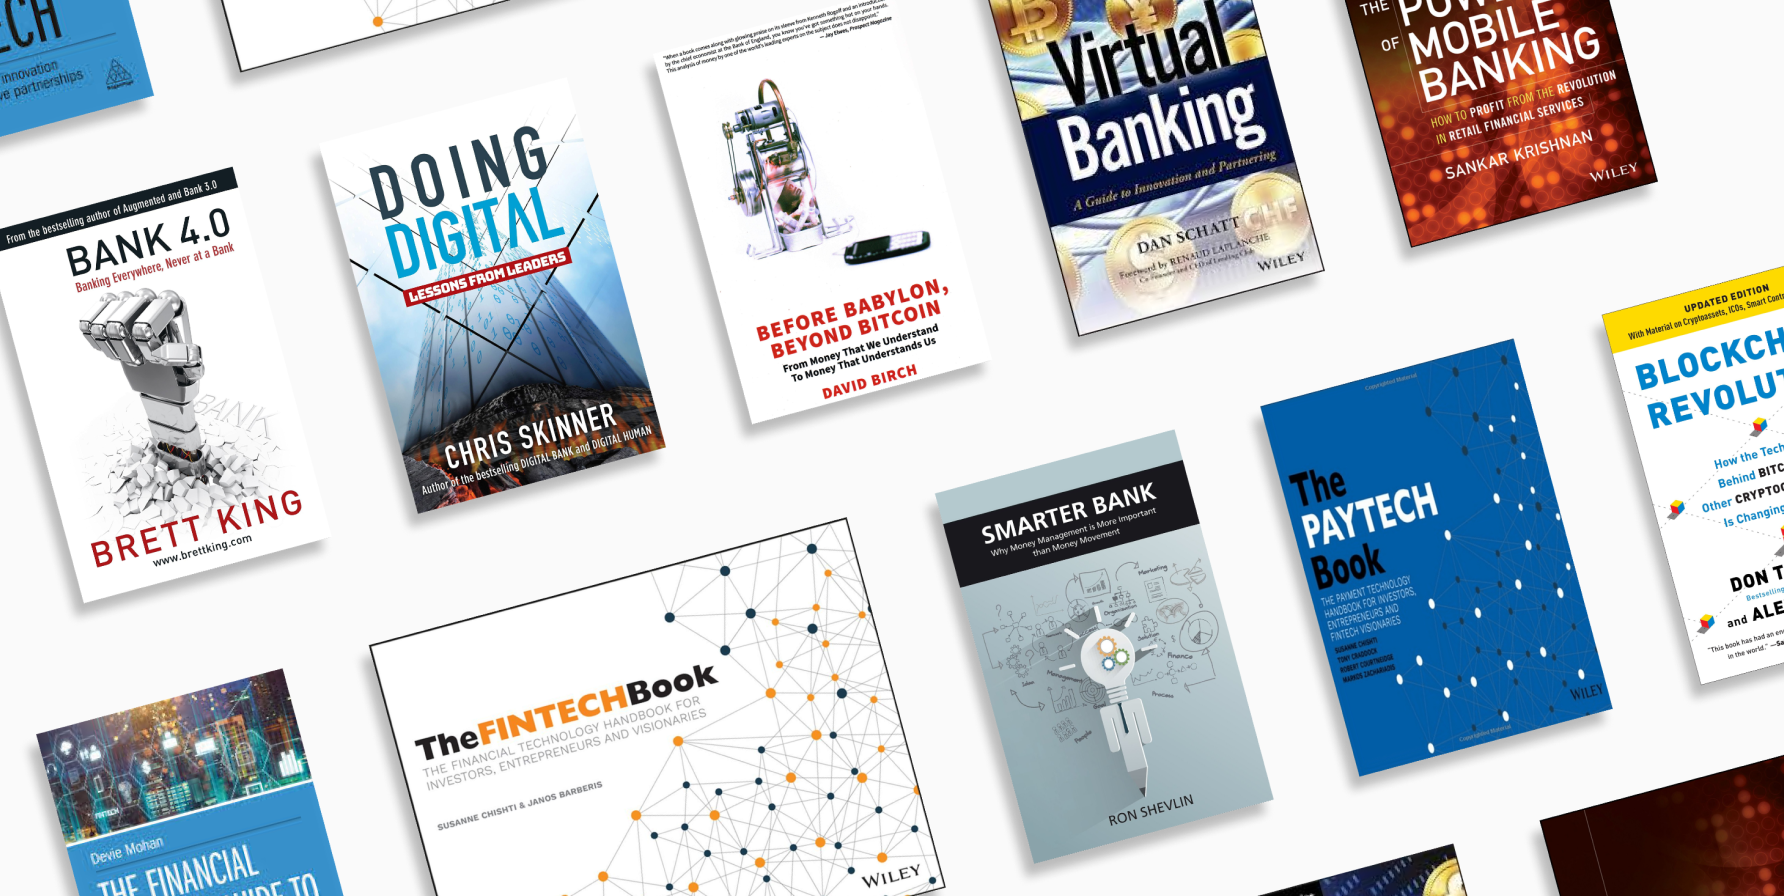 10 Must-Read Books on Fintech, Payments, and Digital Banking